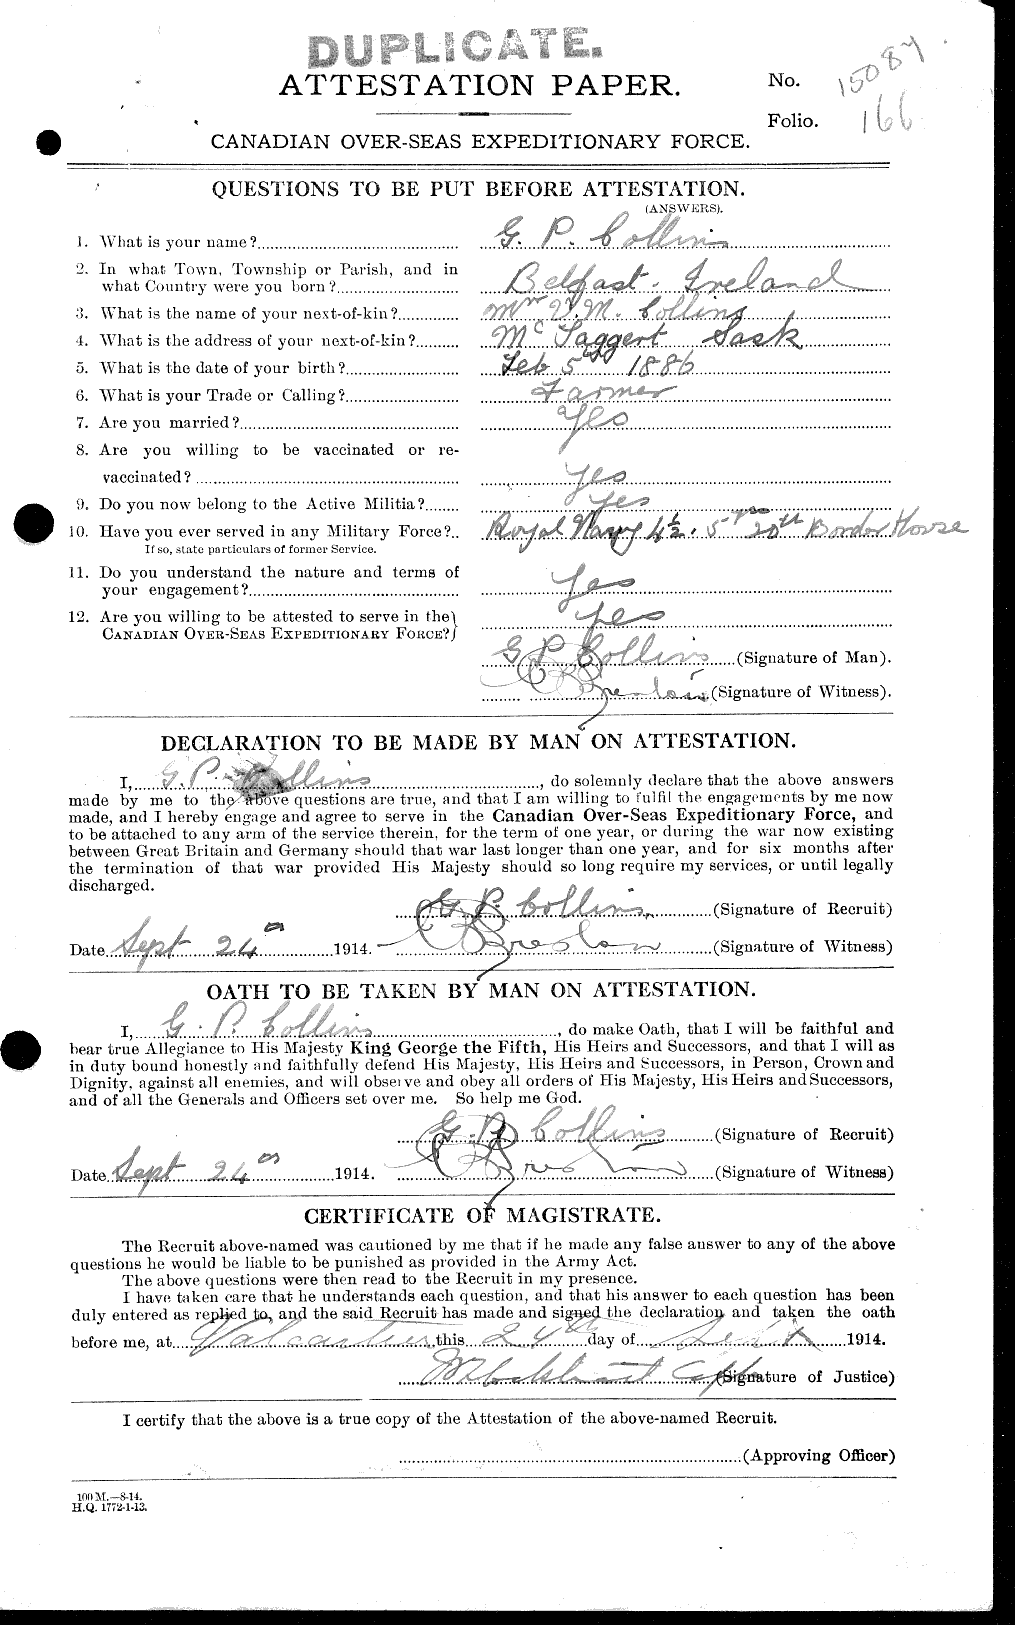 Personnel Records of the First World War - CEF 037874a